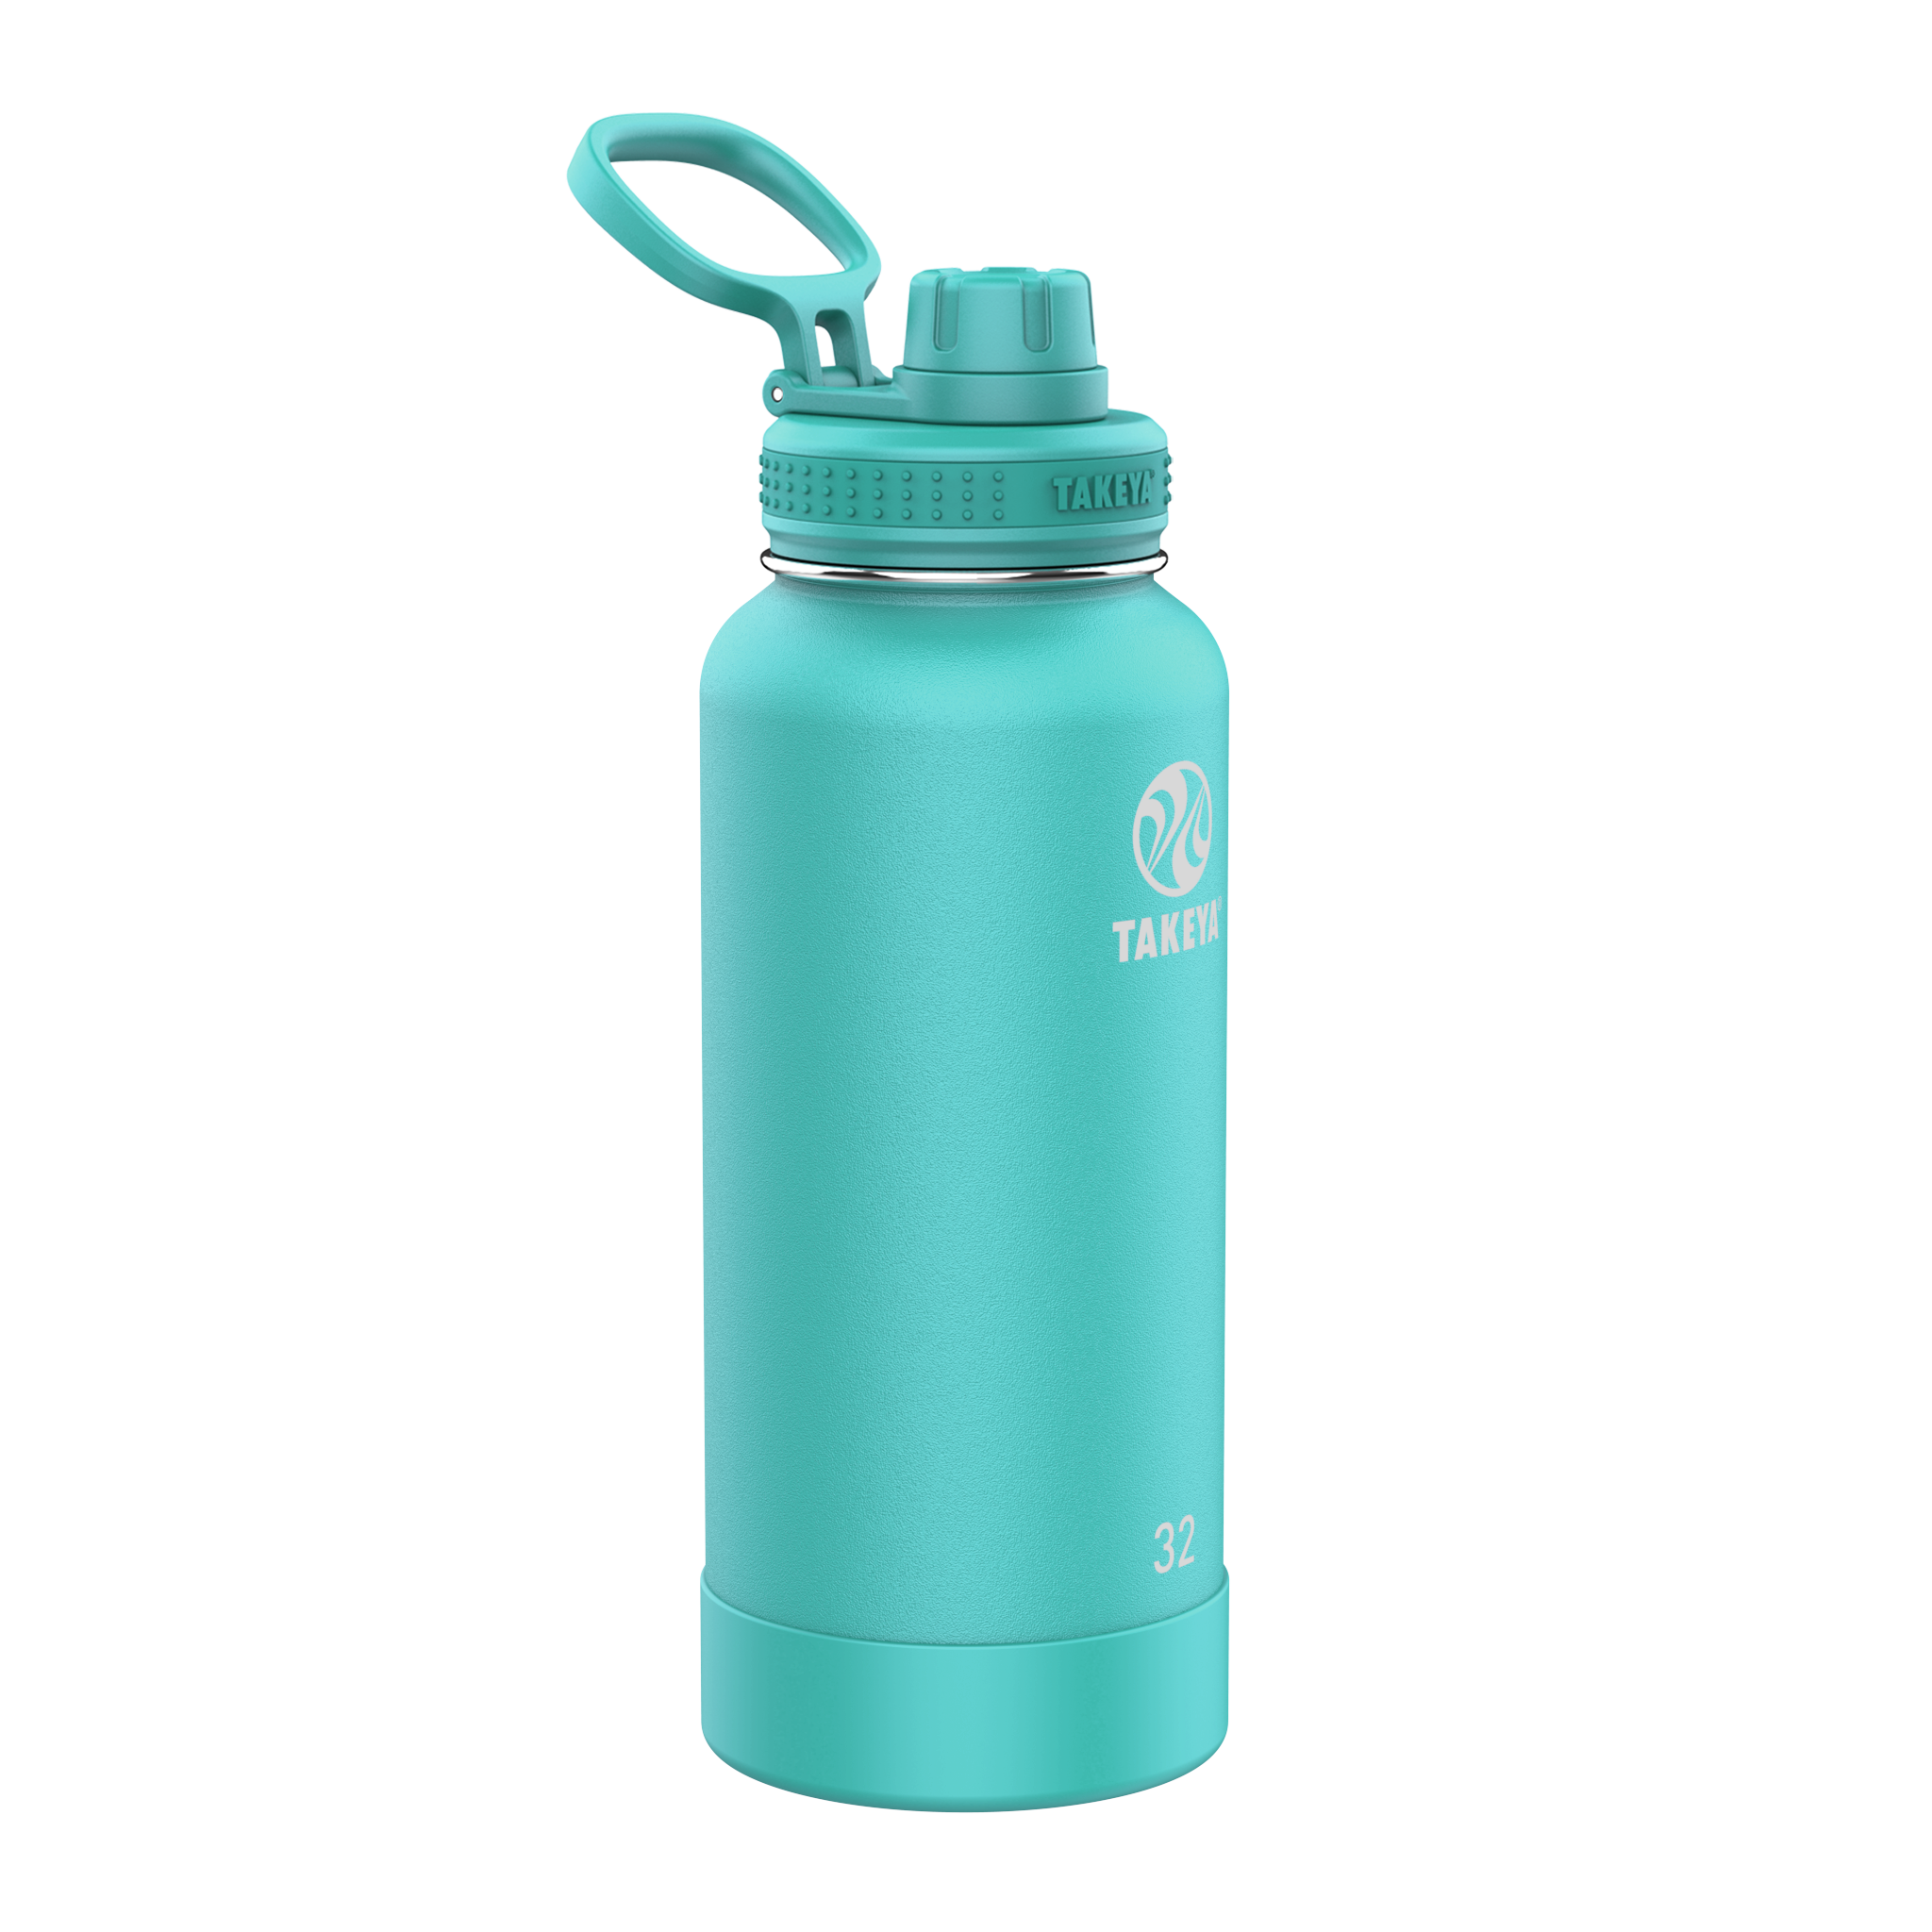 Takeya Actives Insulated Hydration Water Bottle Stainless Steel BPA Free Various 